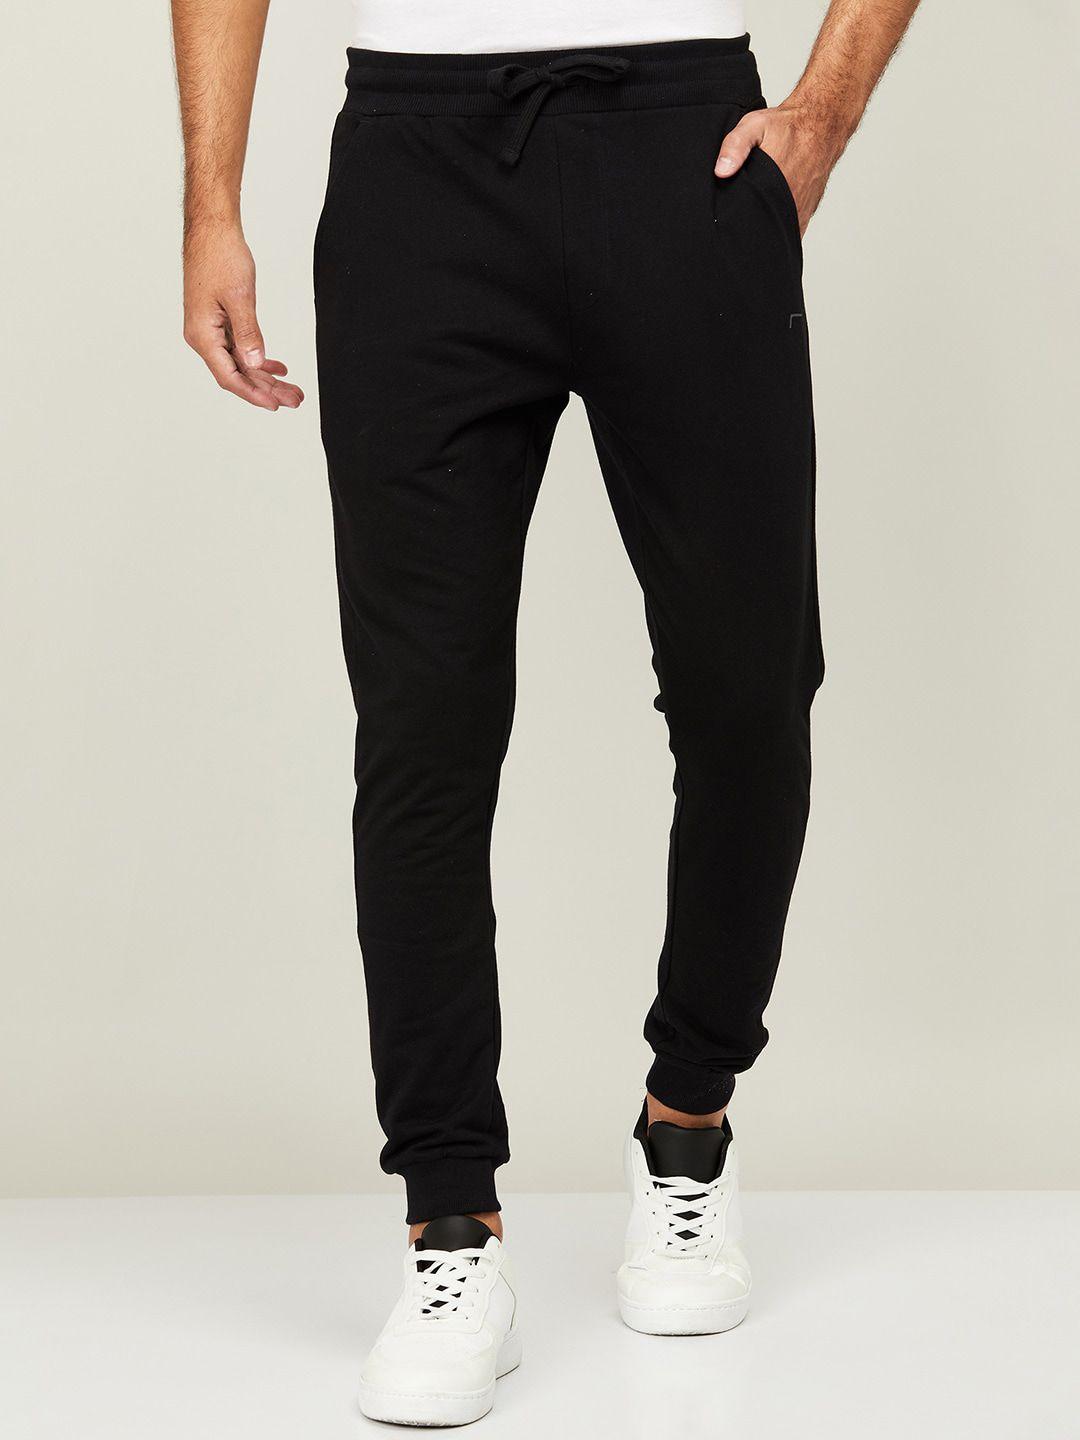 fame-forever-by-lifestyle-men-black-solid-track-pants